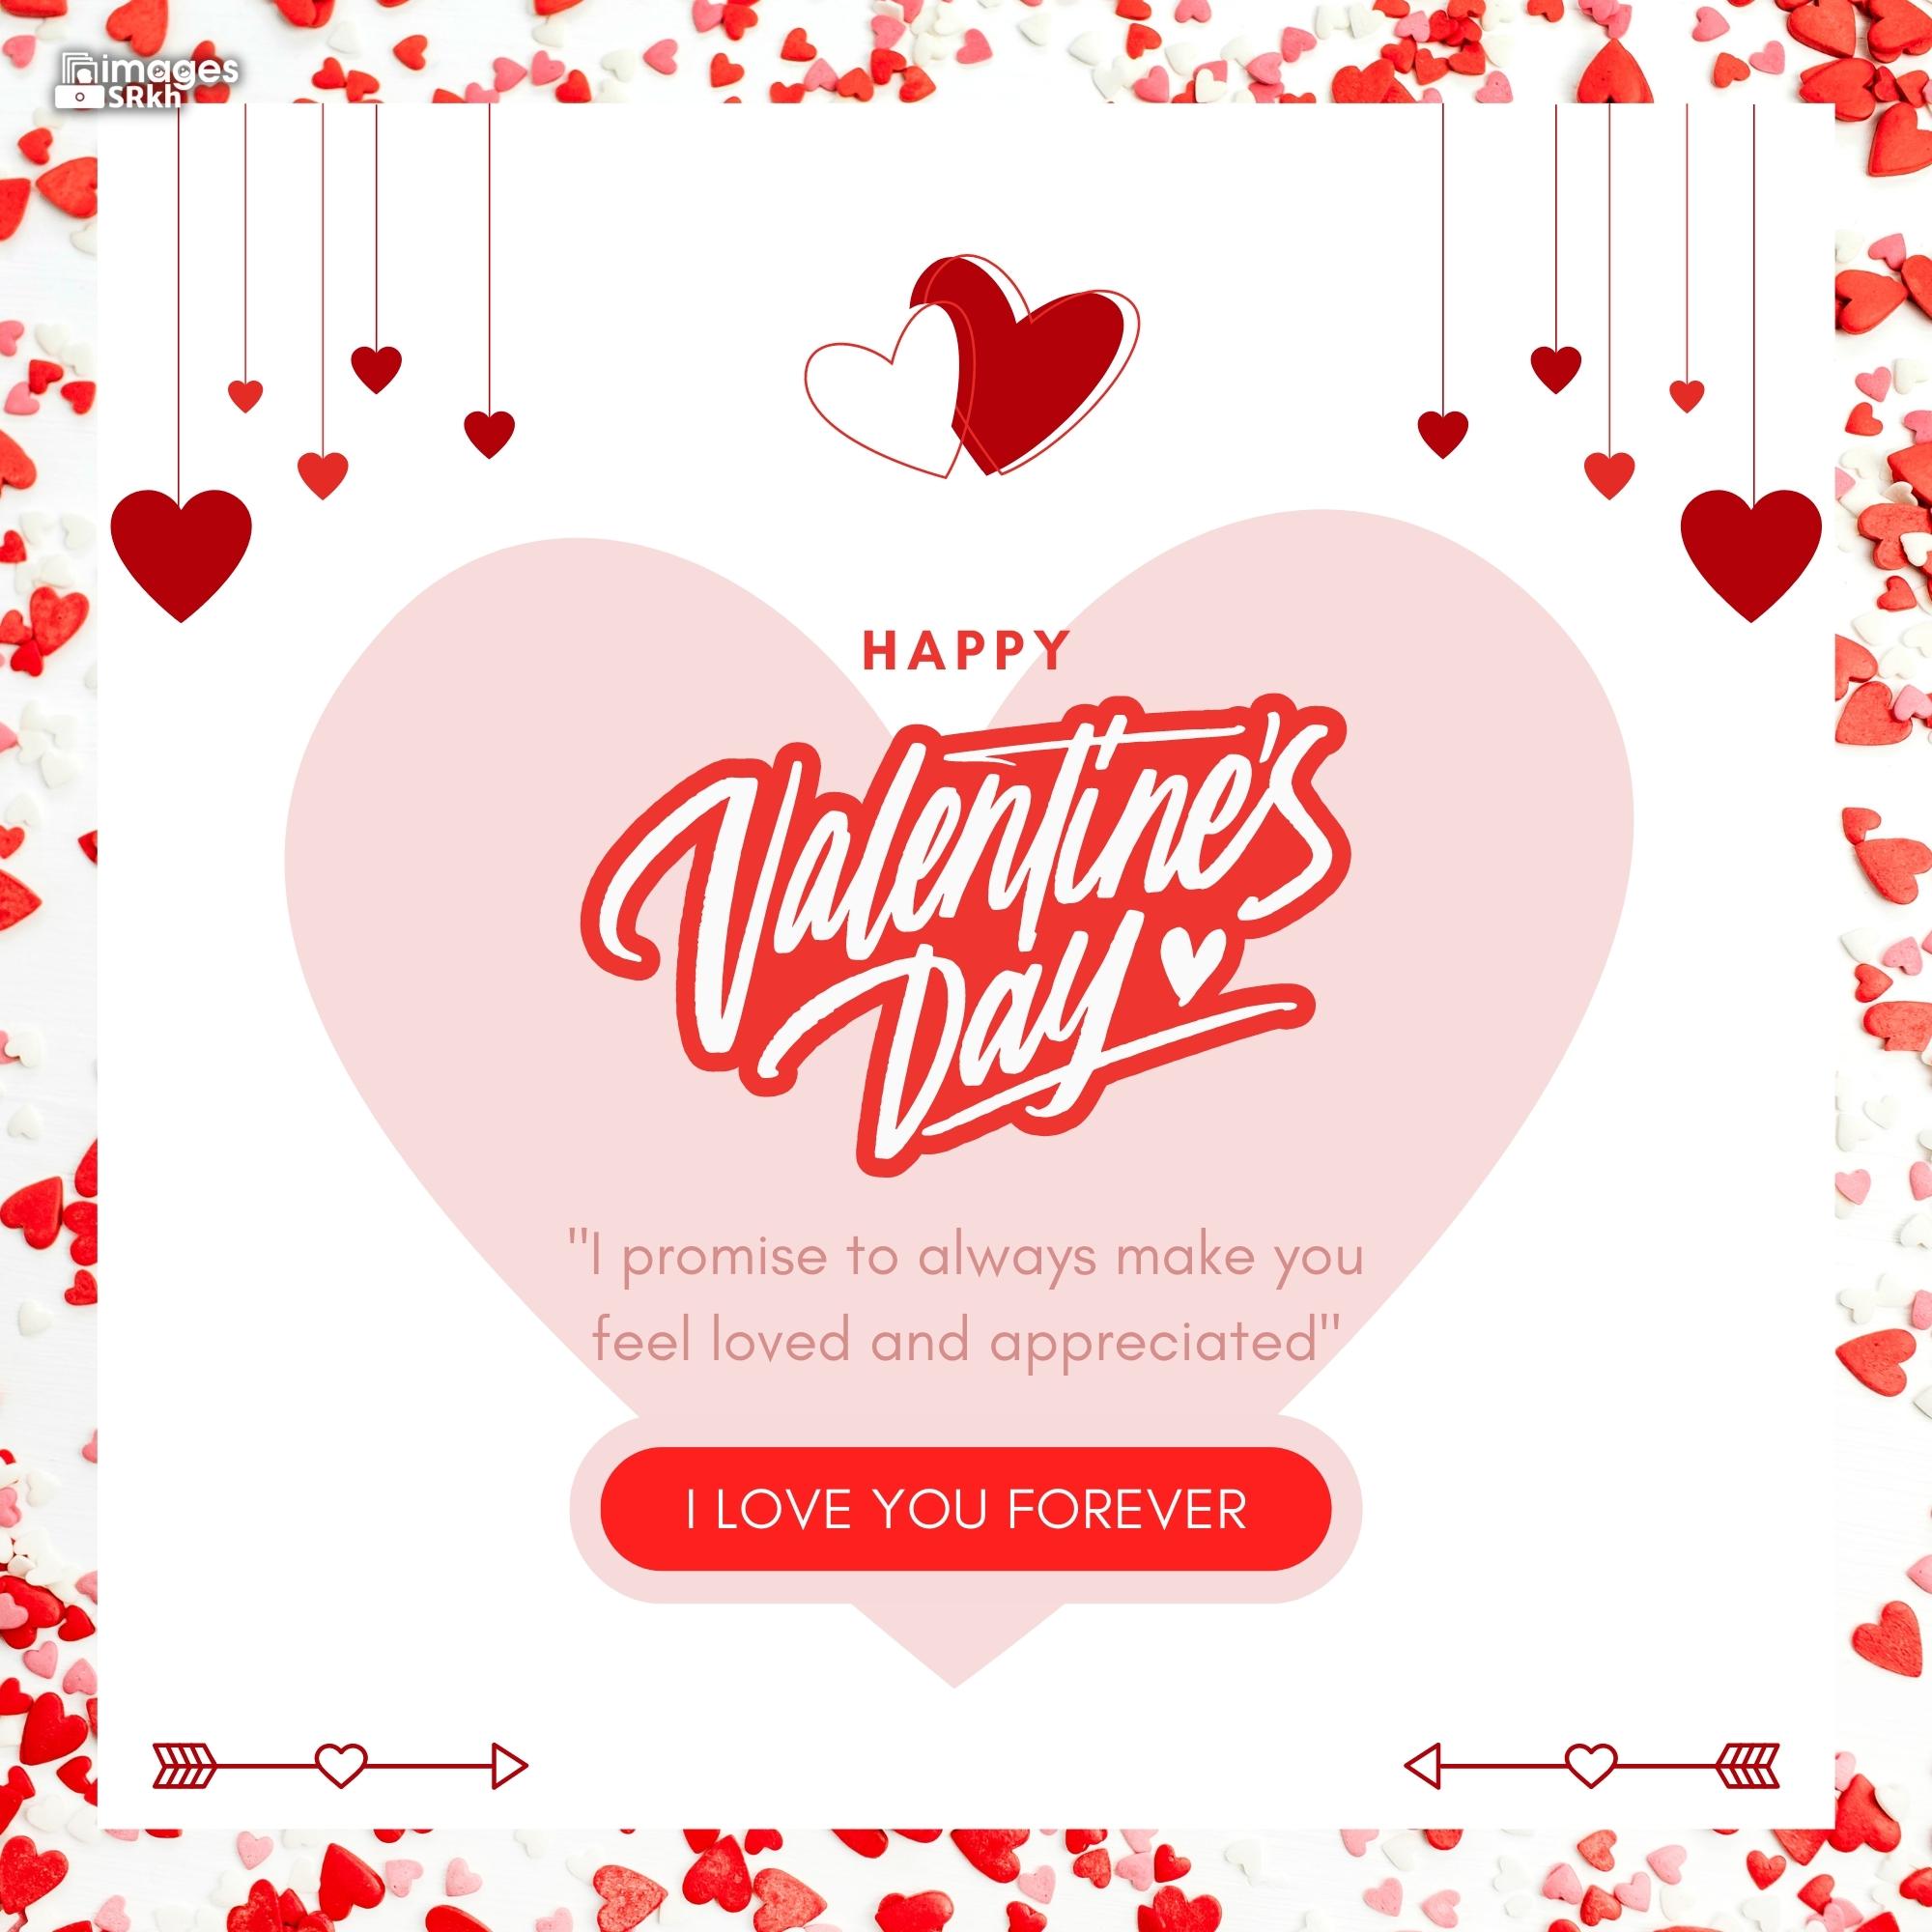 Happy Valentines Day | 522 | PREMIUM IMAGES | Wishes for Love